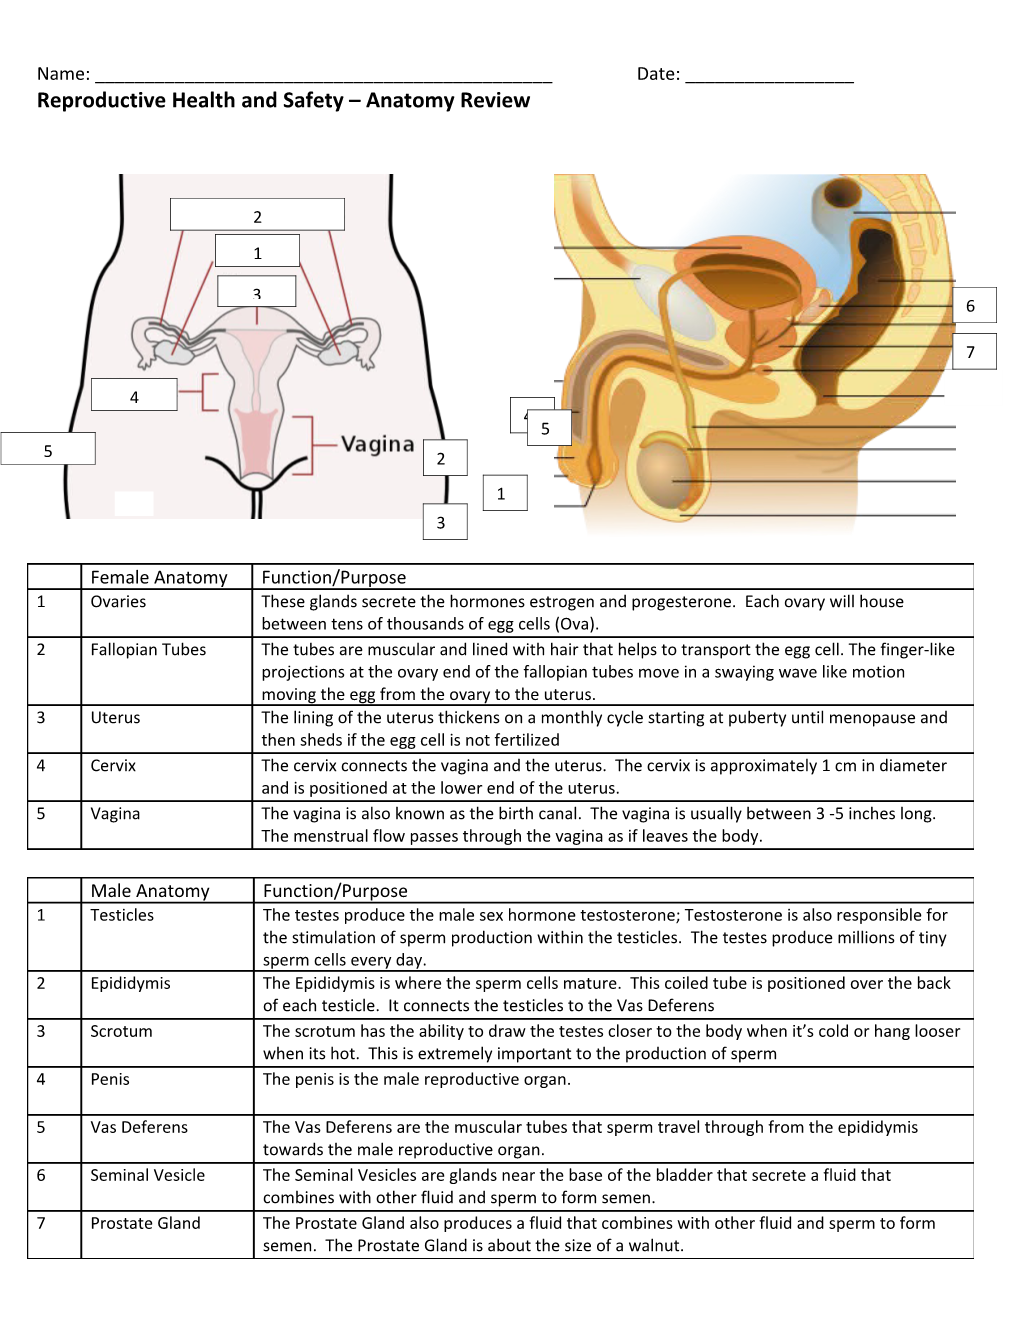 Reproductive Health and Safety Anatomy Review